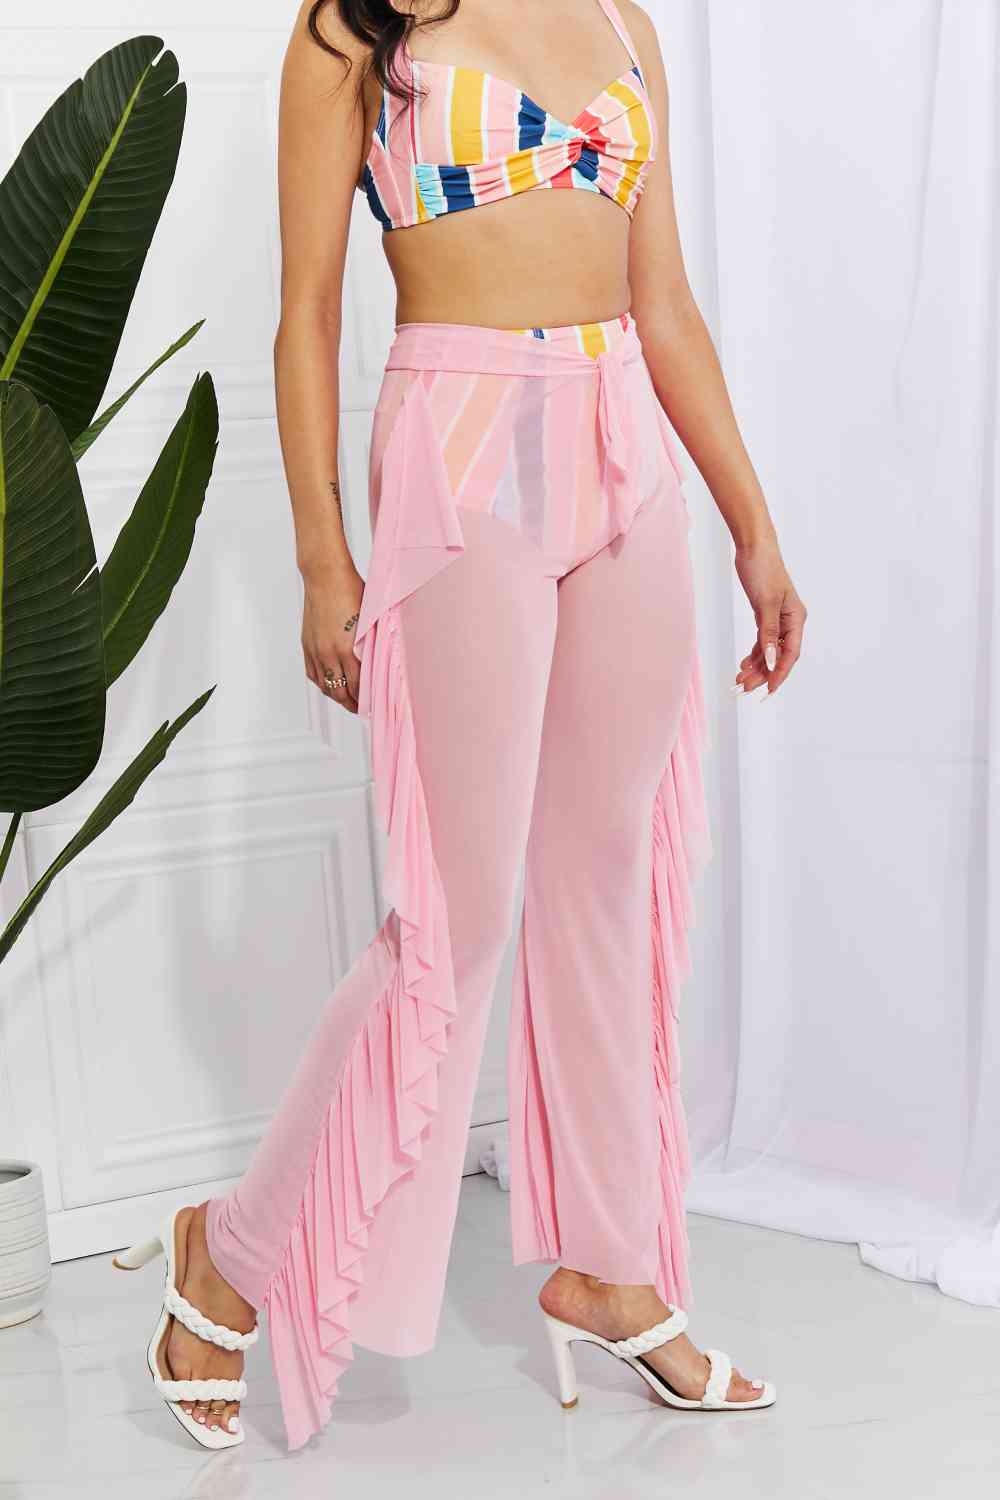 Take Me To The Beach Mesh Ruffle Cover-Up Pants - Blush Pink / One Size - Bottoms - Swimwear - 3 - 2024